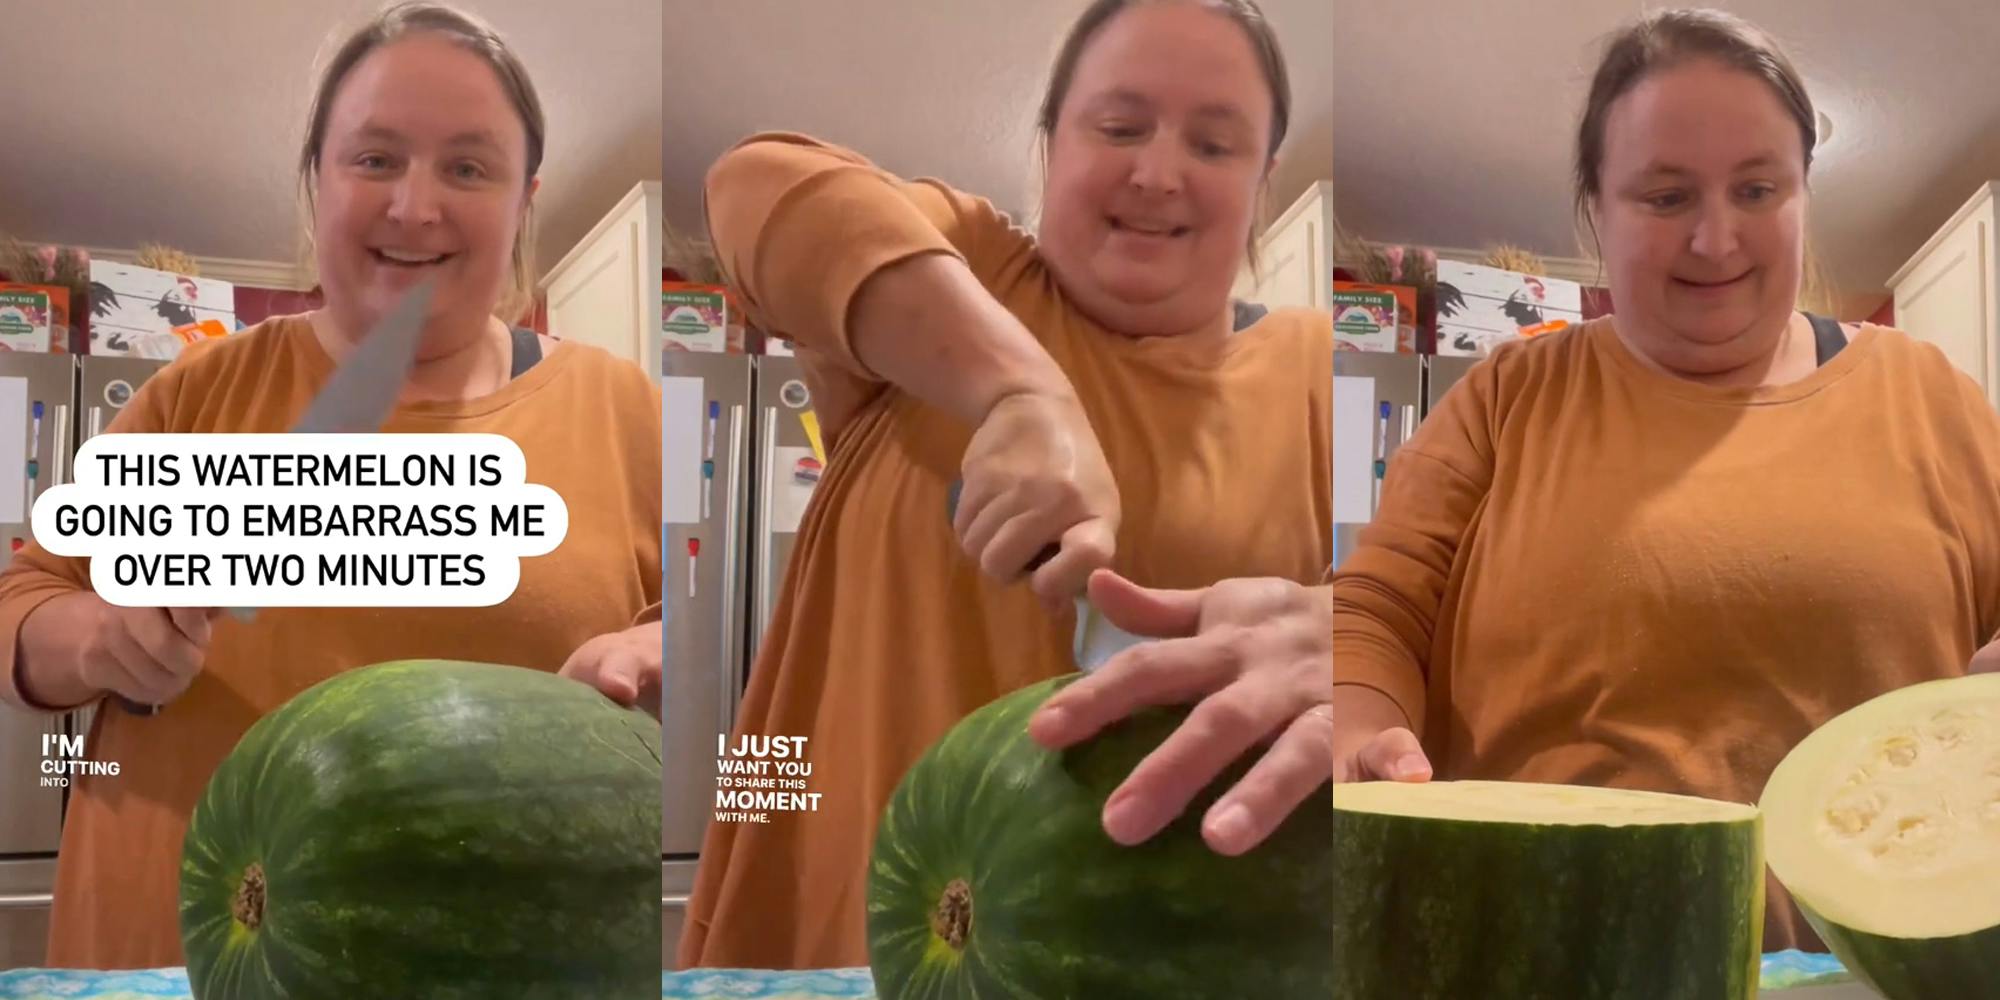 woman with "watermelon" with caption "THIS WATERMELON IS GOING TO EMBARRASS ME OVER TWO MINUTES" (l) woman with "watermelon" with caption "I just want you to share this moment with me" (c) woman with "watermelon" (r)